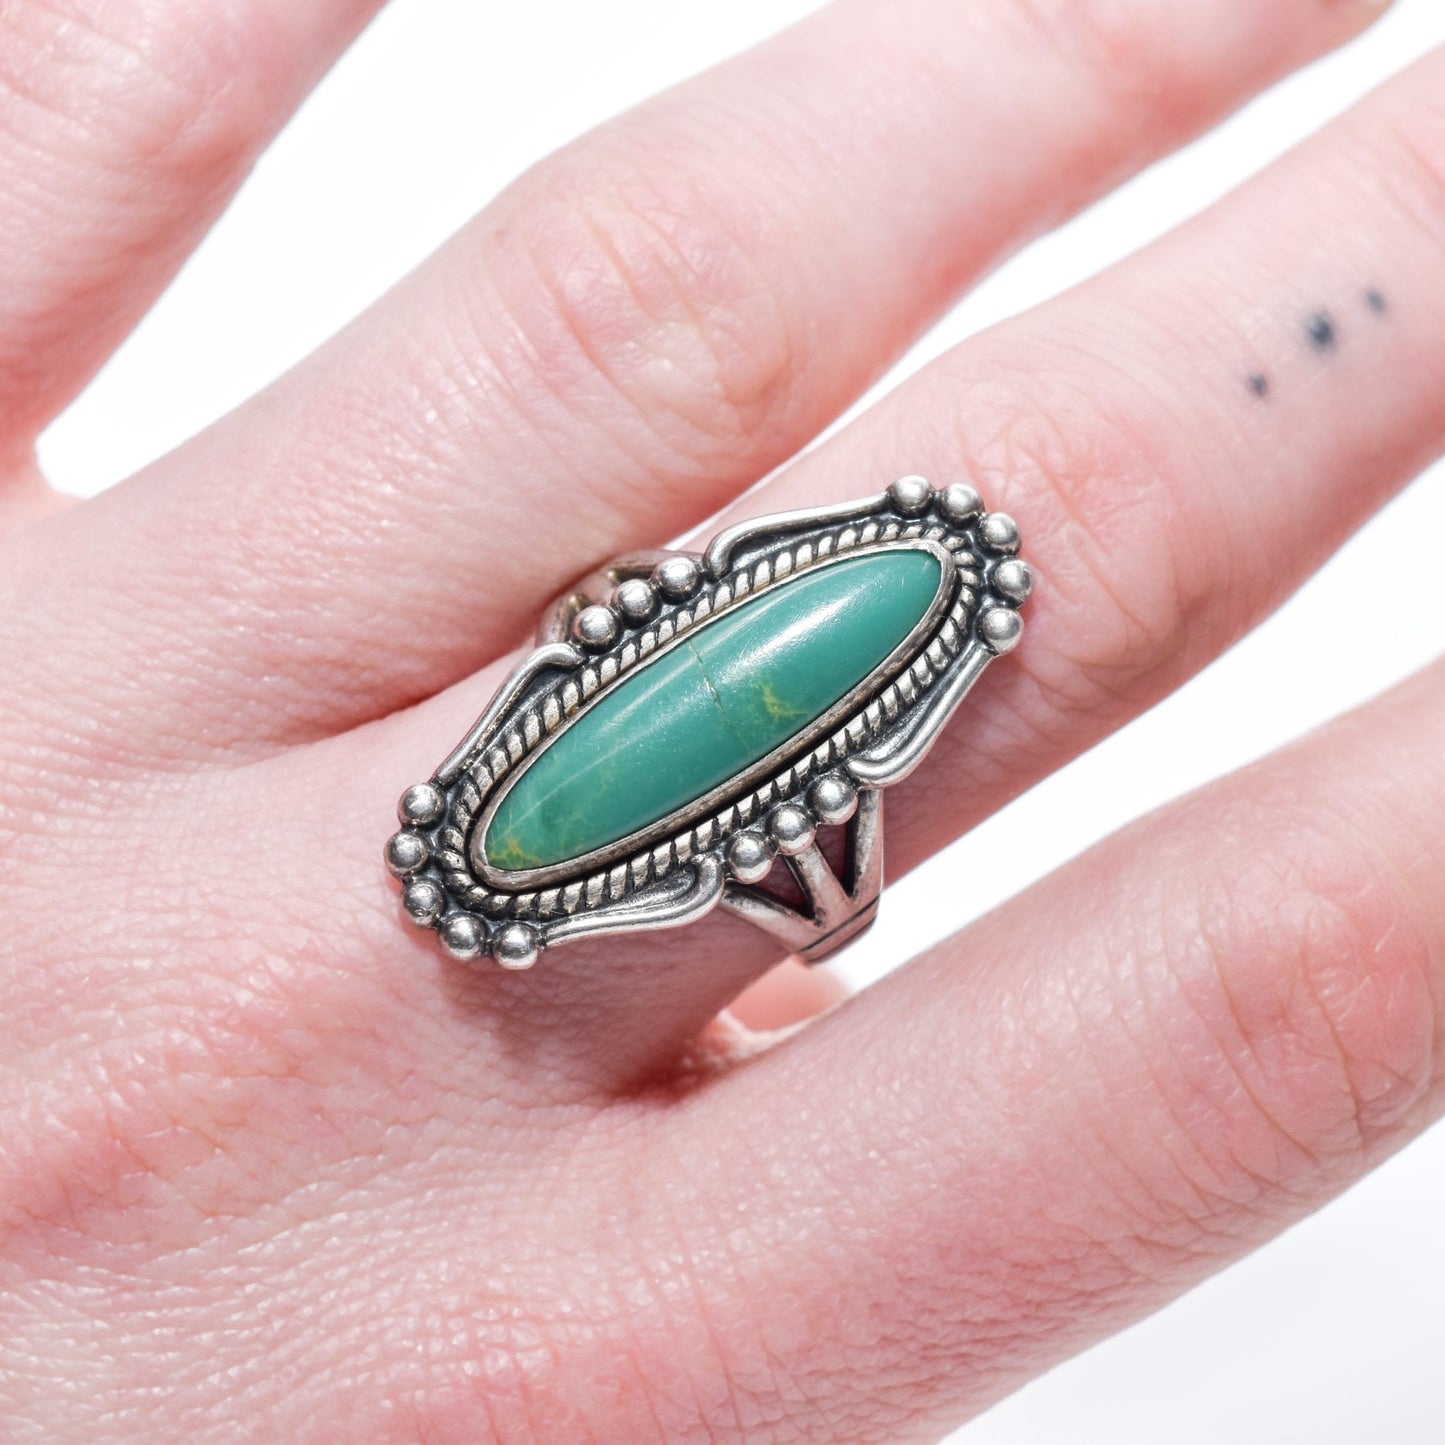 Native American sterling silver turquoise marquise ring on finger, Southwestern jewelry, size 8 US, with intricate metalwork detail.